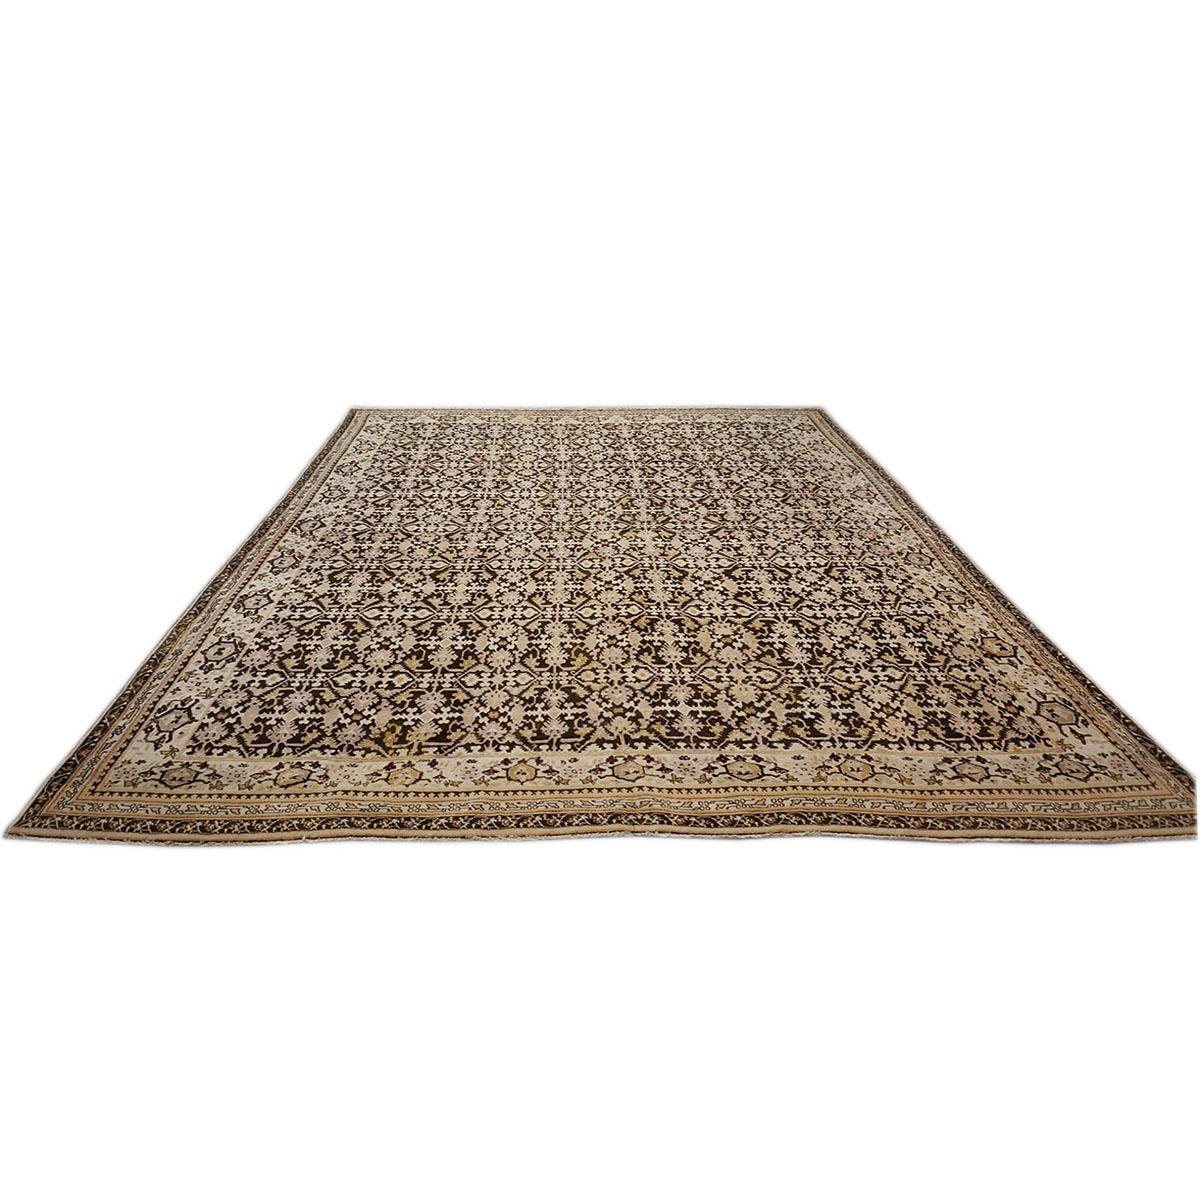 20th Century Antique Indian Agra 12x14 Brown & Ivory Handmade Area Rug In Good Condition For Sale In Houston, TX